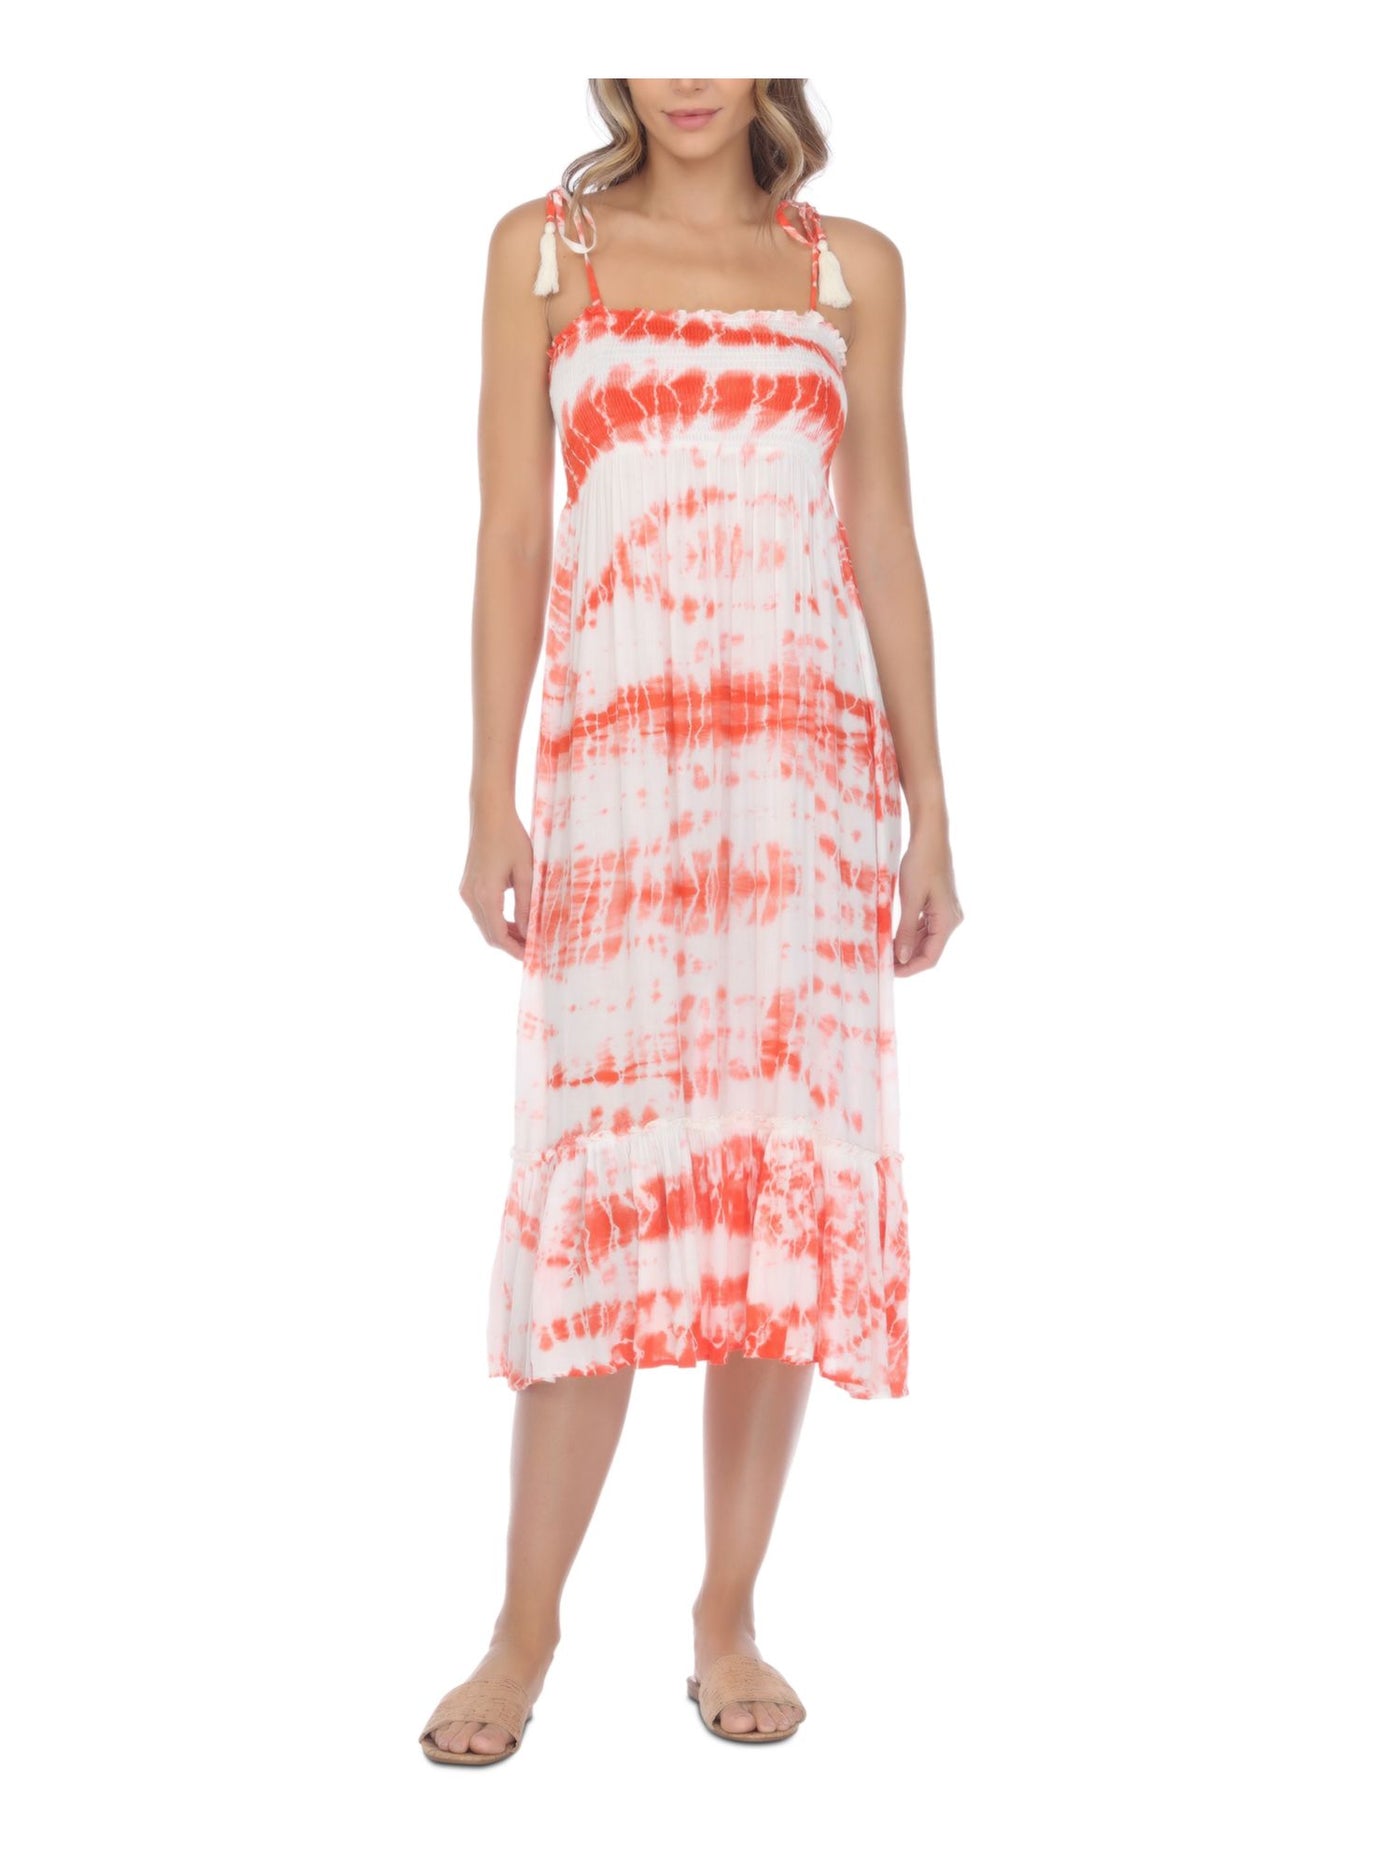 RAVIYA Women's Coral Tie Dye Stretch Tie Ruffled Midi Dress Smocked Adjustable Square Neck Swimsuit Cover Up M